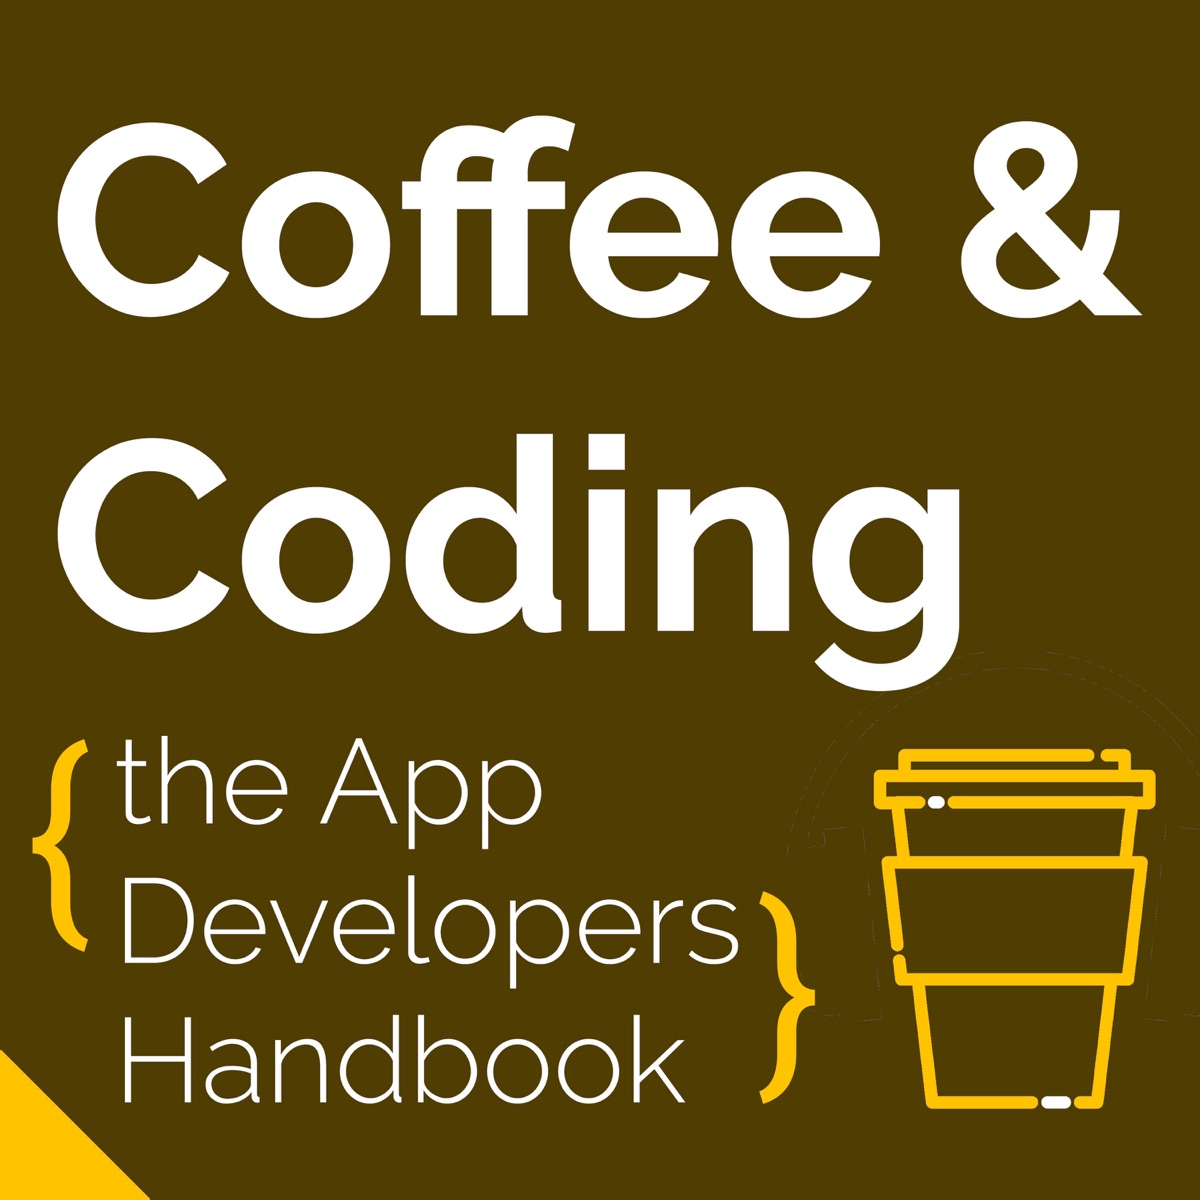 21 João Dias: Making a Living on the Play Store, Tasker, around OS Permissions, App Stalkers & – Coffee & the App Developer Podcast – Podcast – Podtail